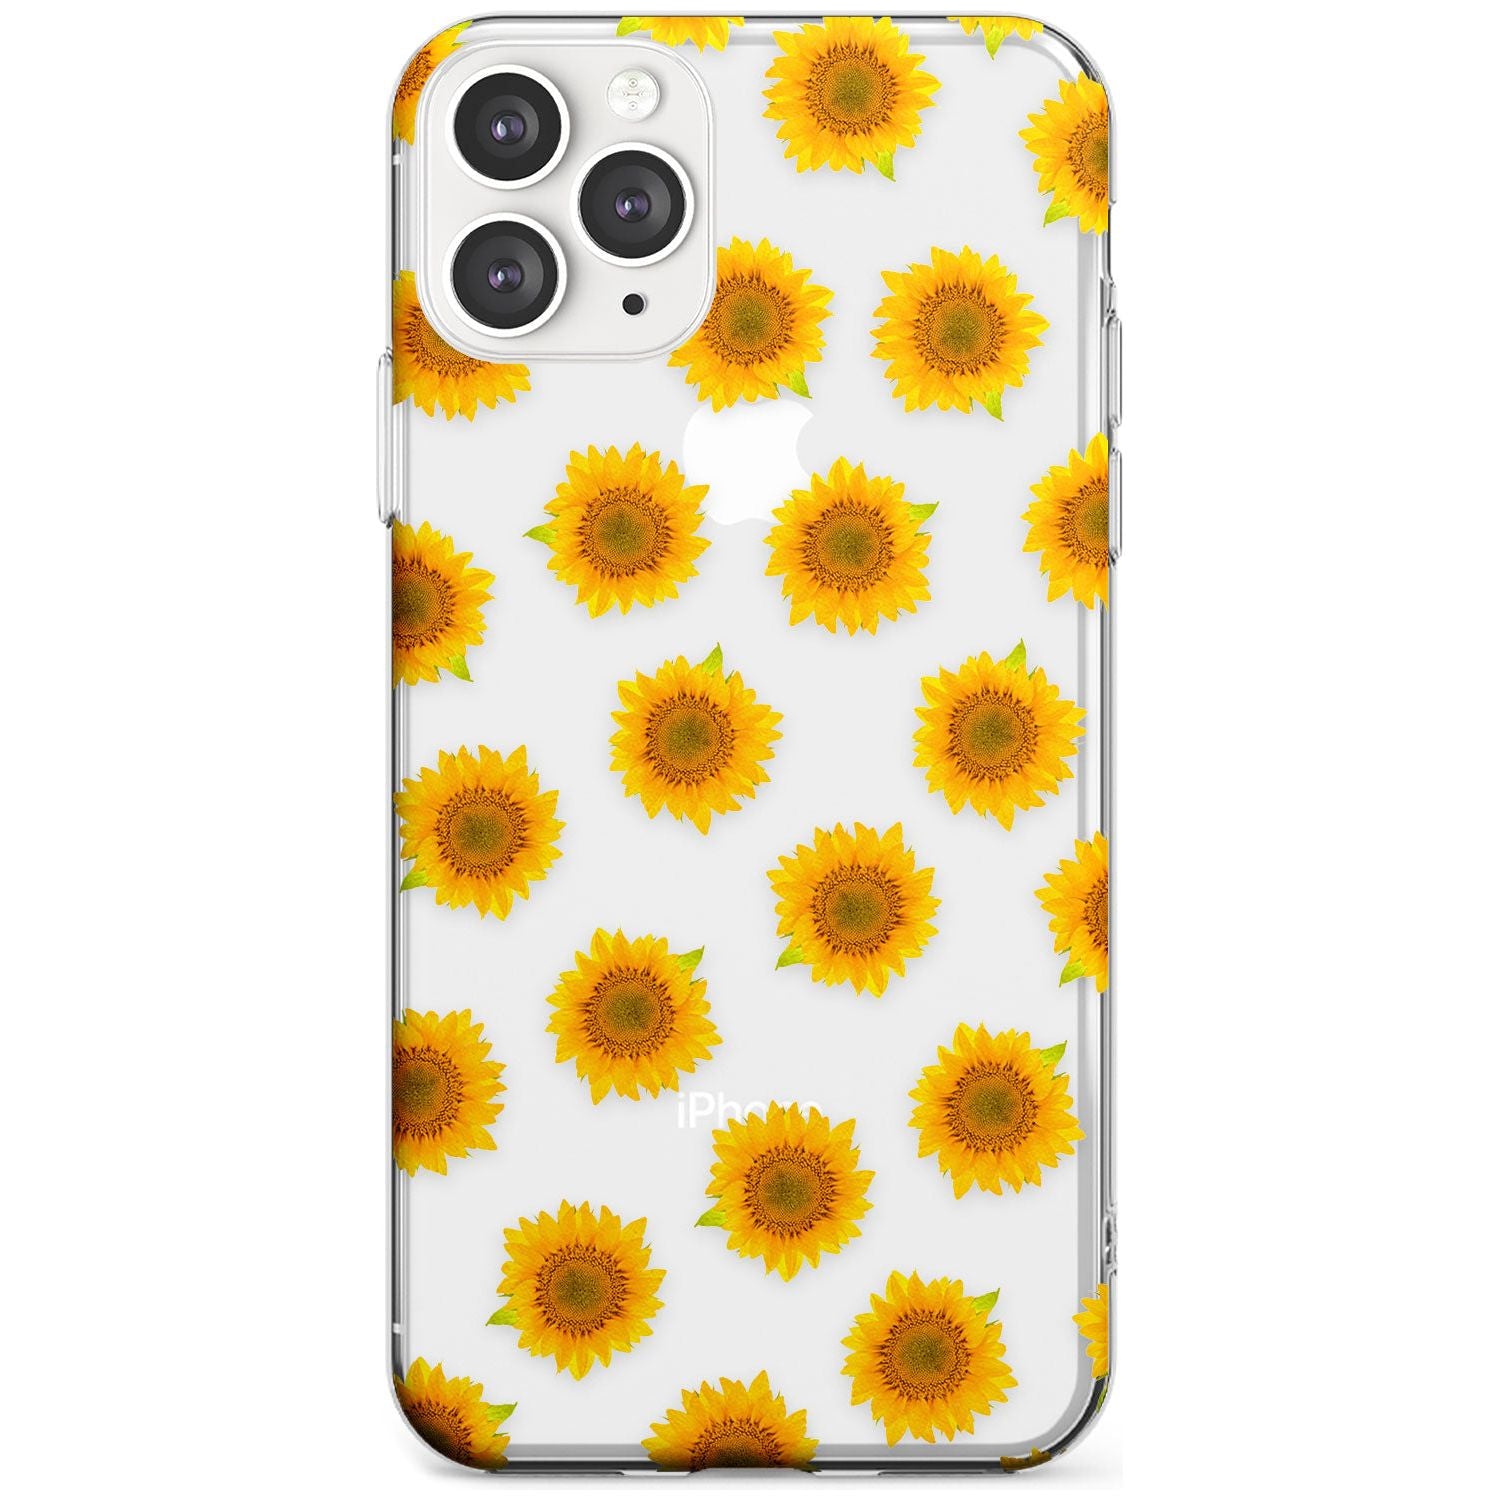 Sunflowers Transparent Pattern Slim TPU Phone Case for iPhone 11 Pro Max